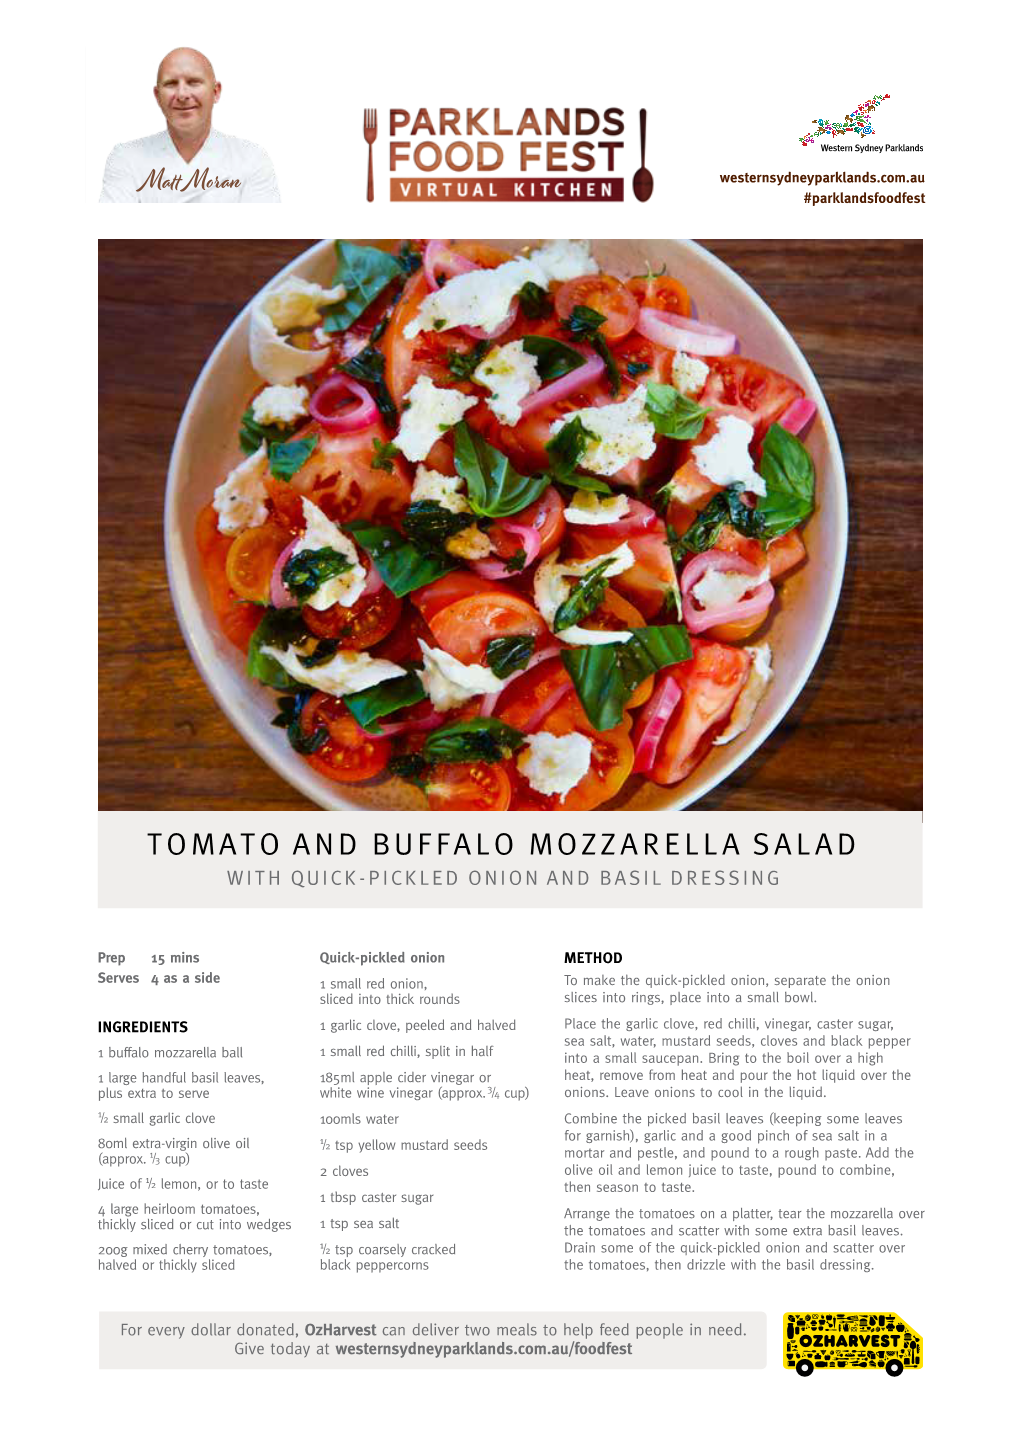 Tomato and Buffalo Mozzarella Salad with Quick-Pickled Onion and Basil Dressing